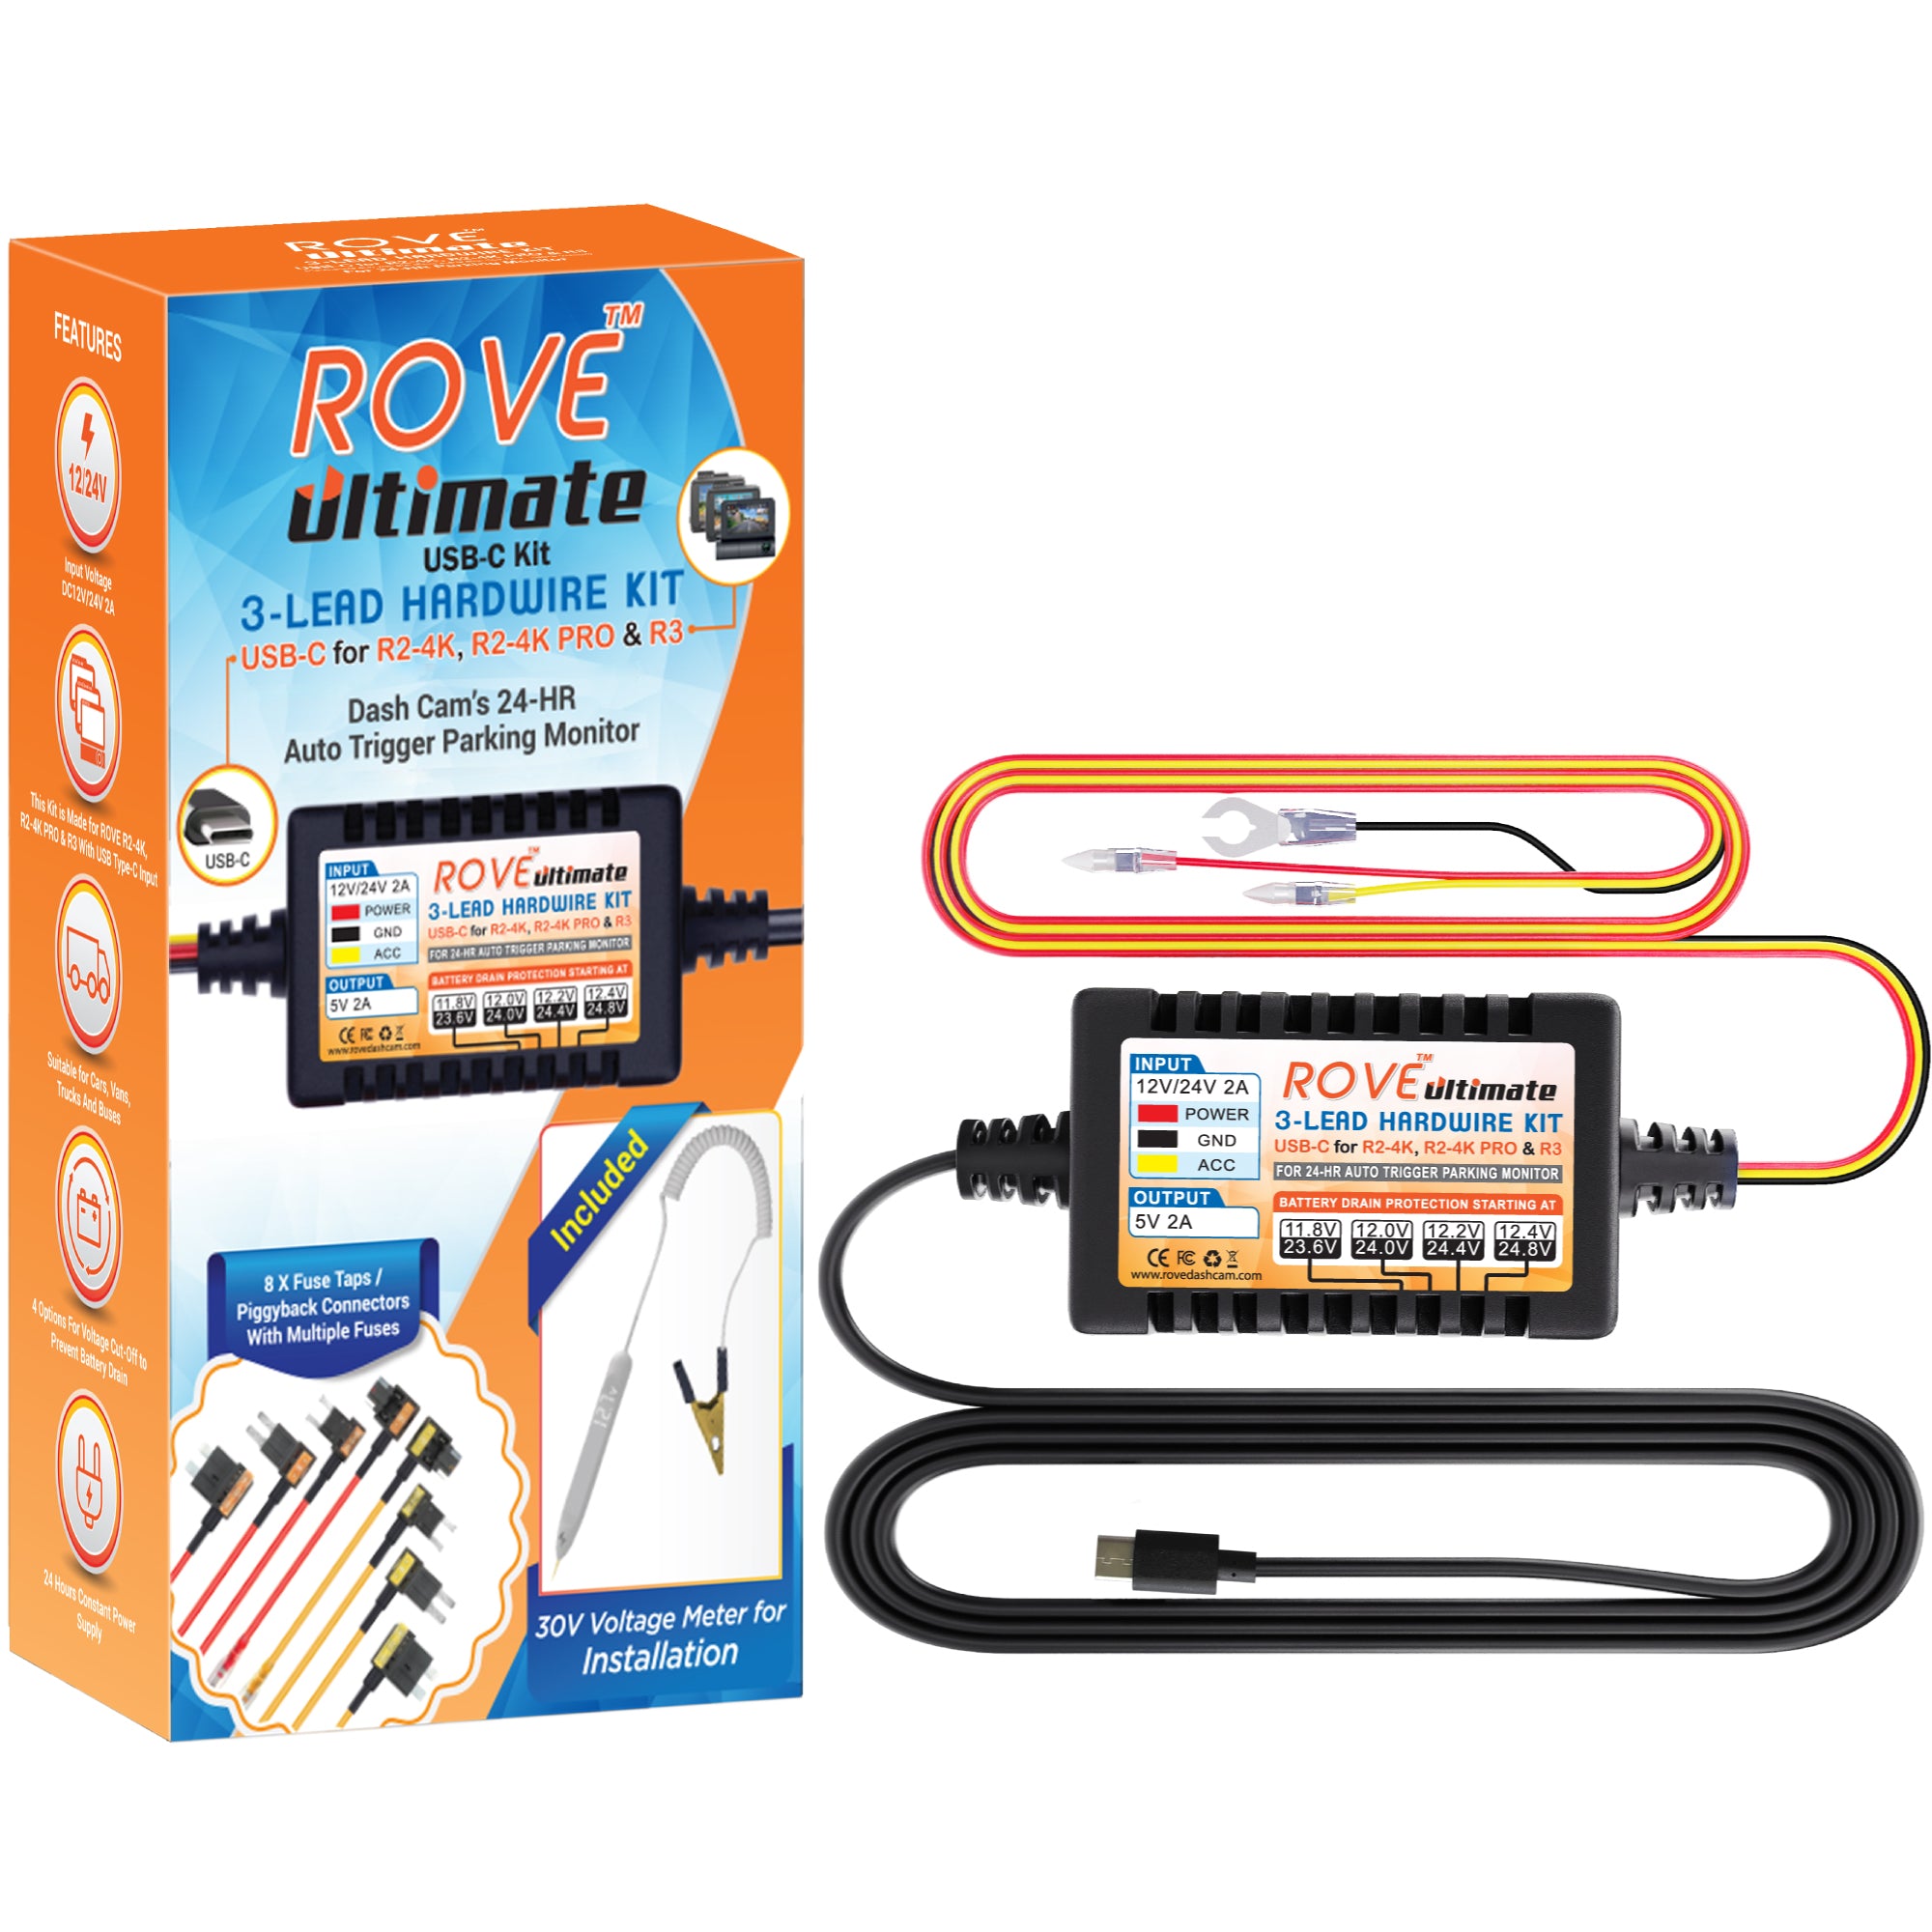 ROVE Ultimate 3-Lead USB Type-C Hardwire Kit | for ROVE R2, R2 PRO and R3 Dash Cam | Check Compatibility Image Before Purchasing